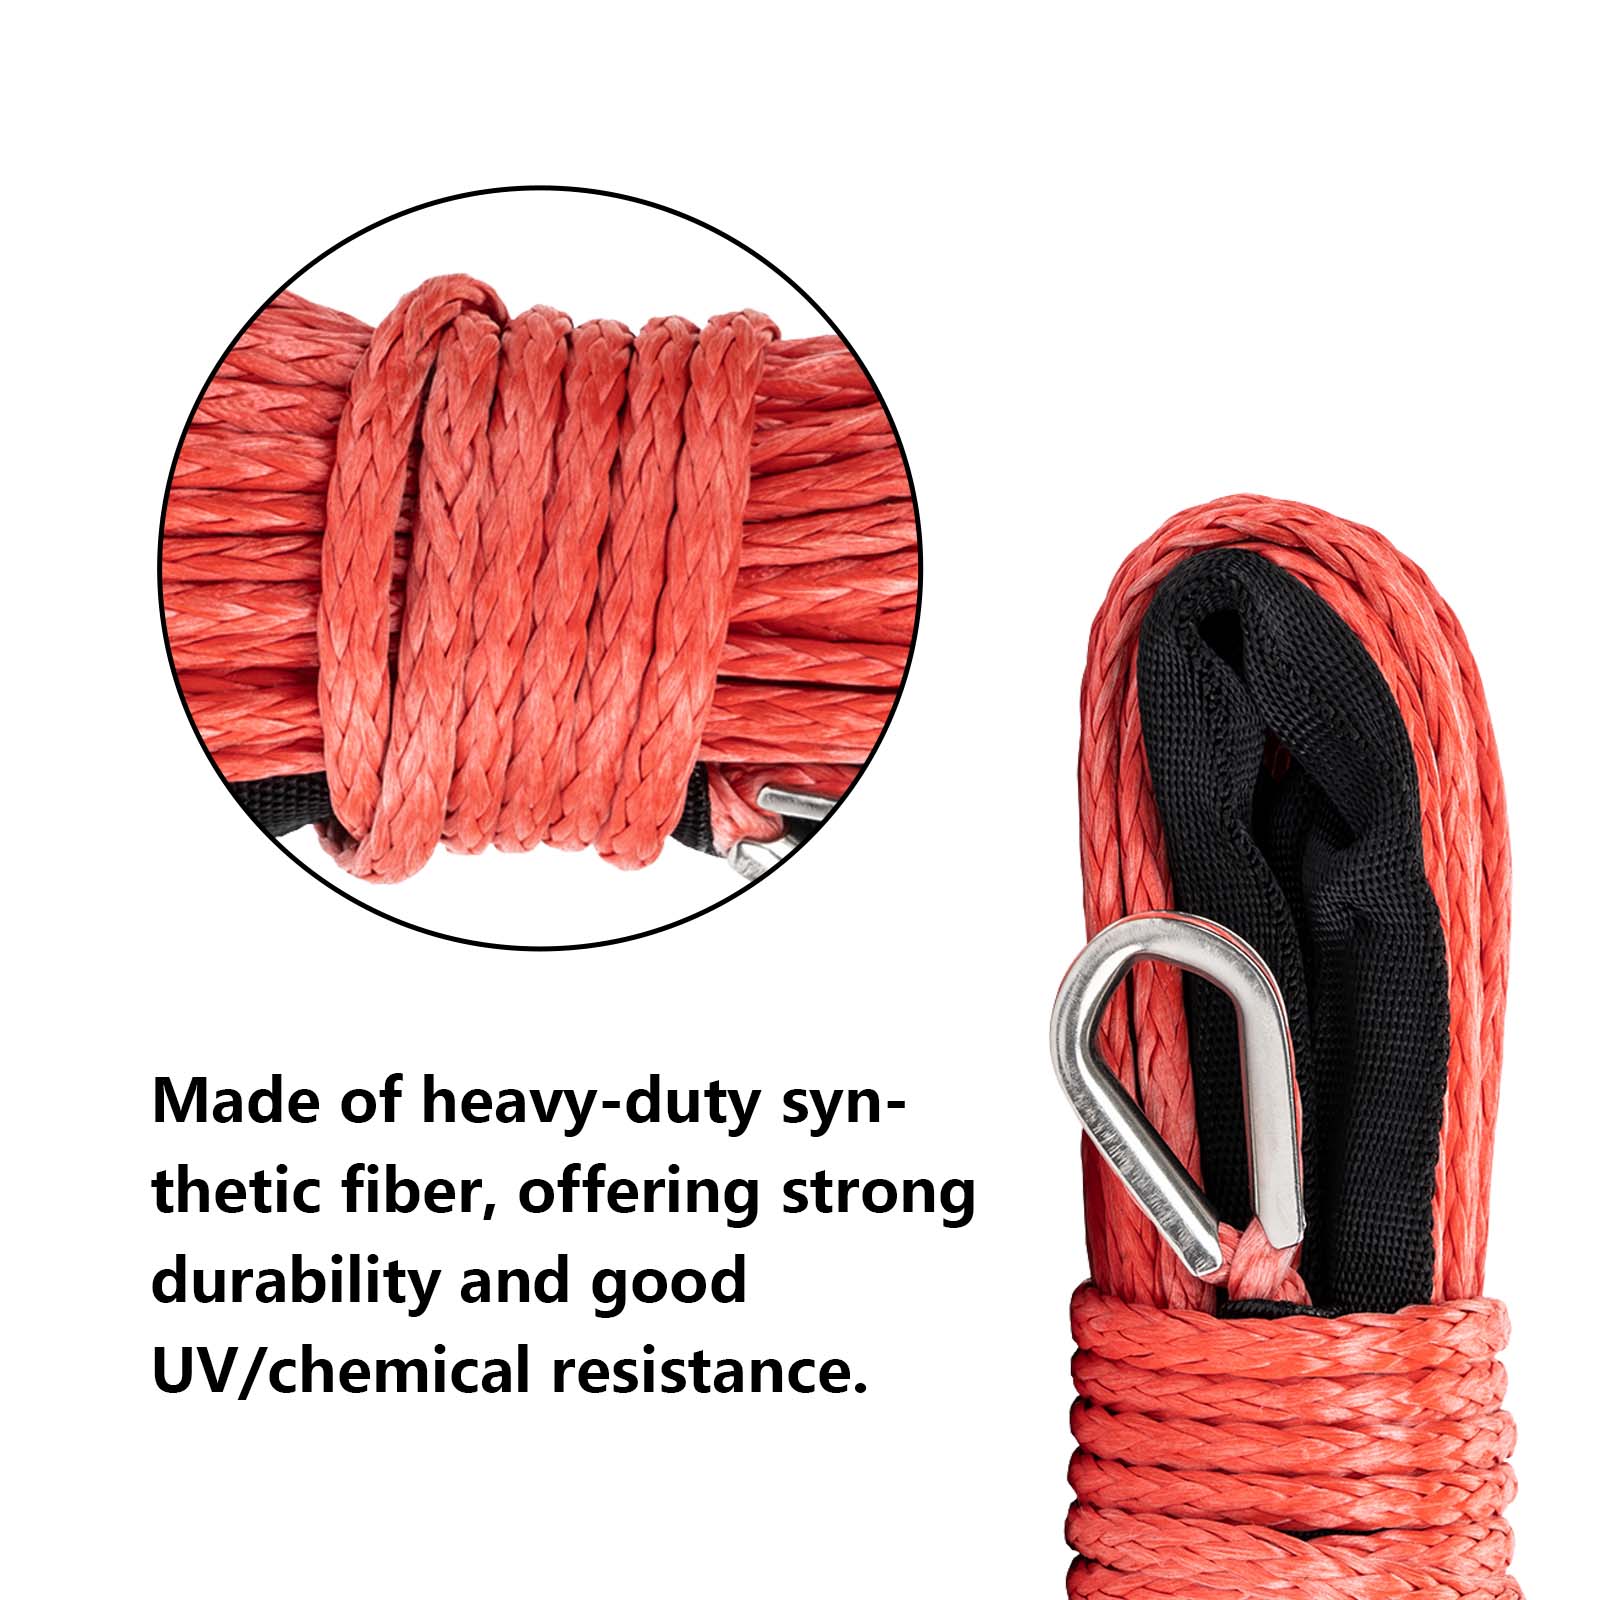 OPENROAD Synthetic Winch Rope 3/16'' x 50'Winch Rope Extension with Galvanized Removable Hook and ATV New Adjustable Rubber Blocks  openroad4wd.com   